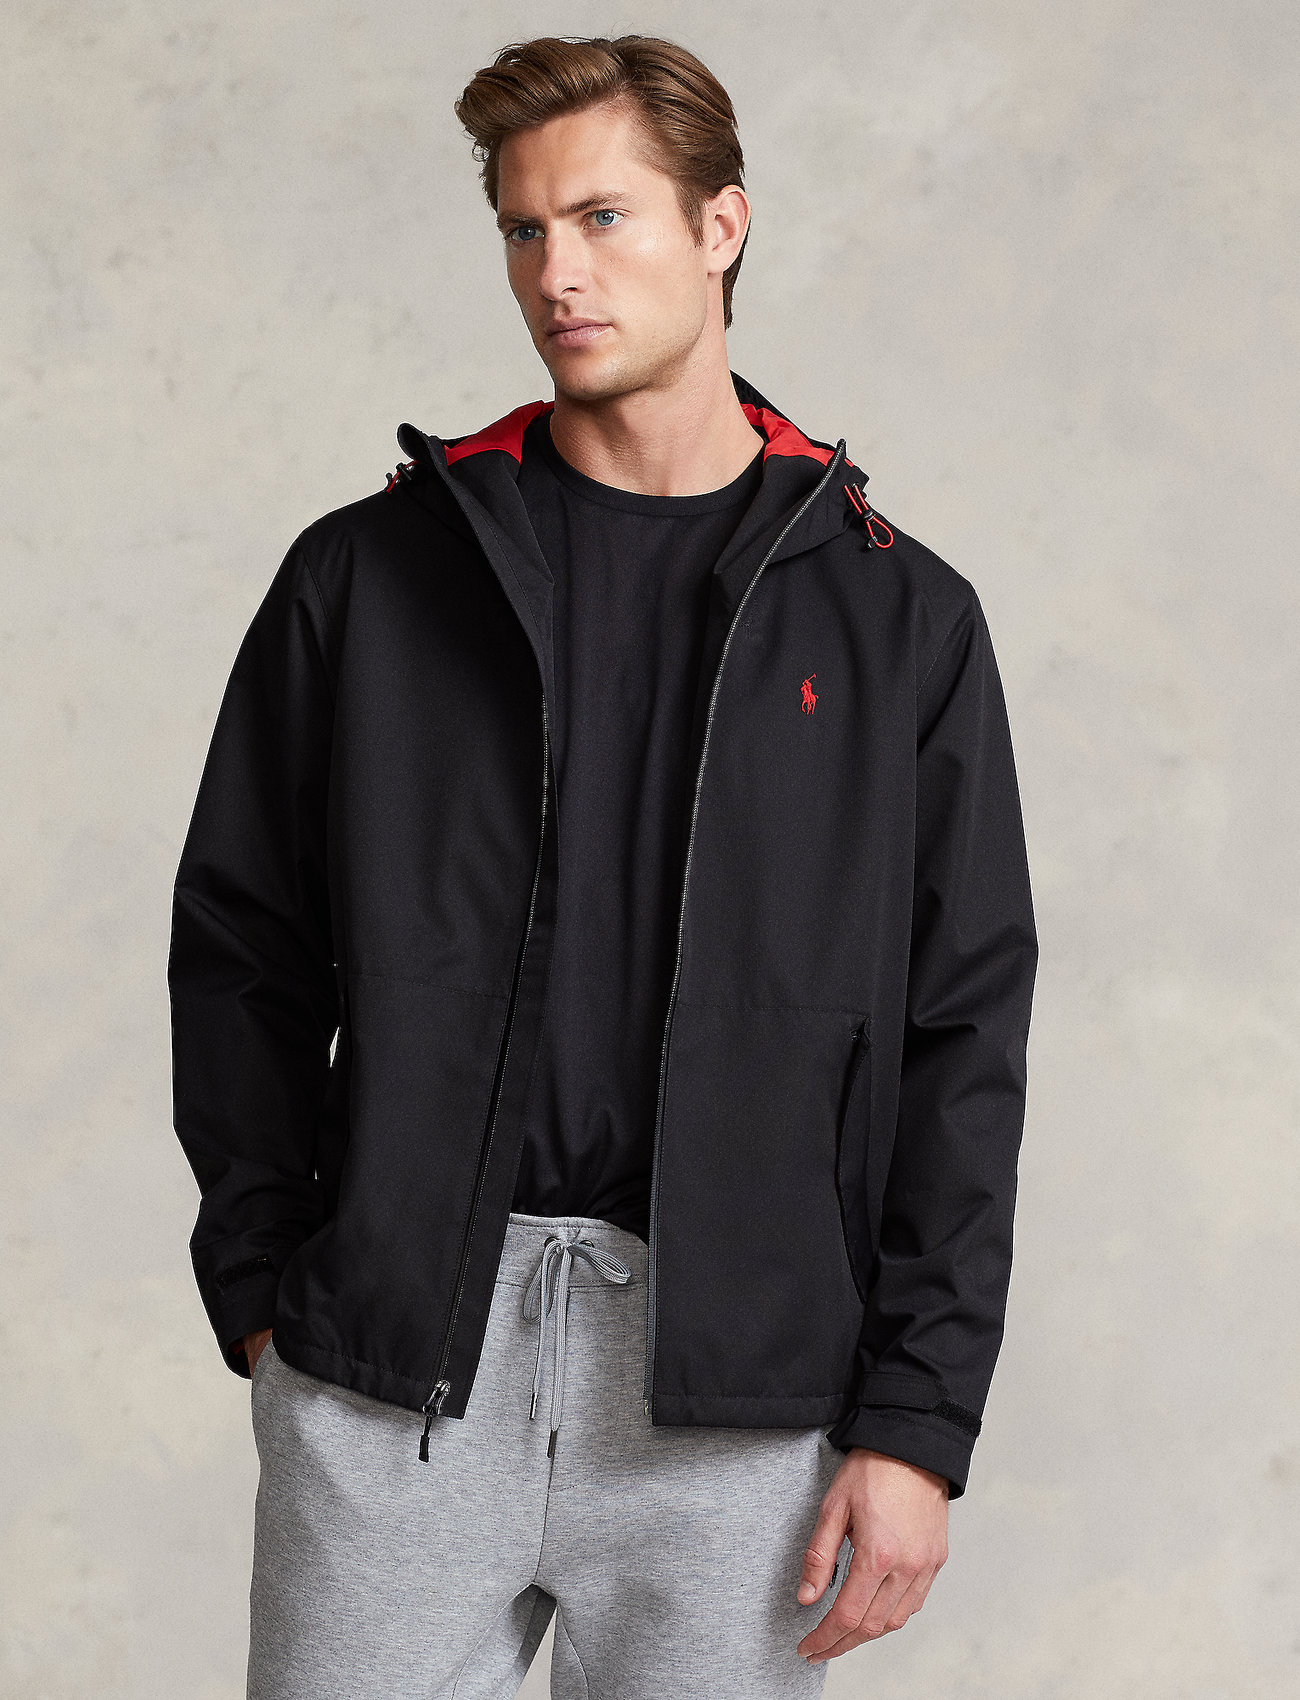 Polo Ralph Lauren Water-resistant Hooded Jacket - 249 €. Buy Light Jackets  from Polo Ralph Lauren online at . Fast delivery and easy returns